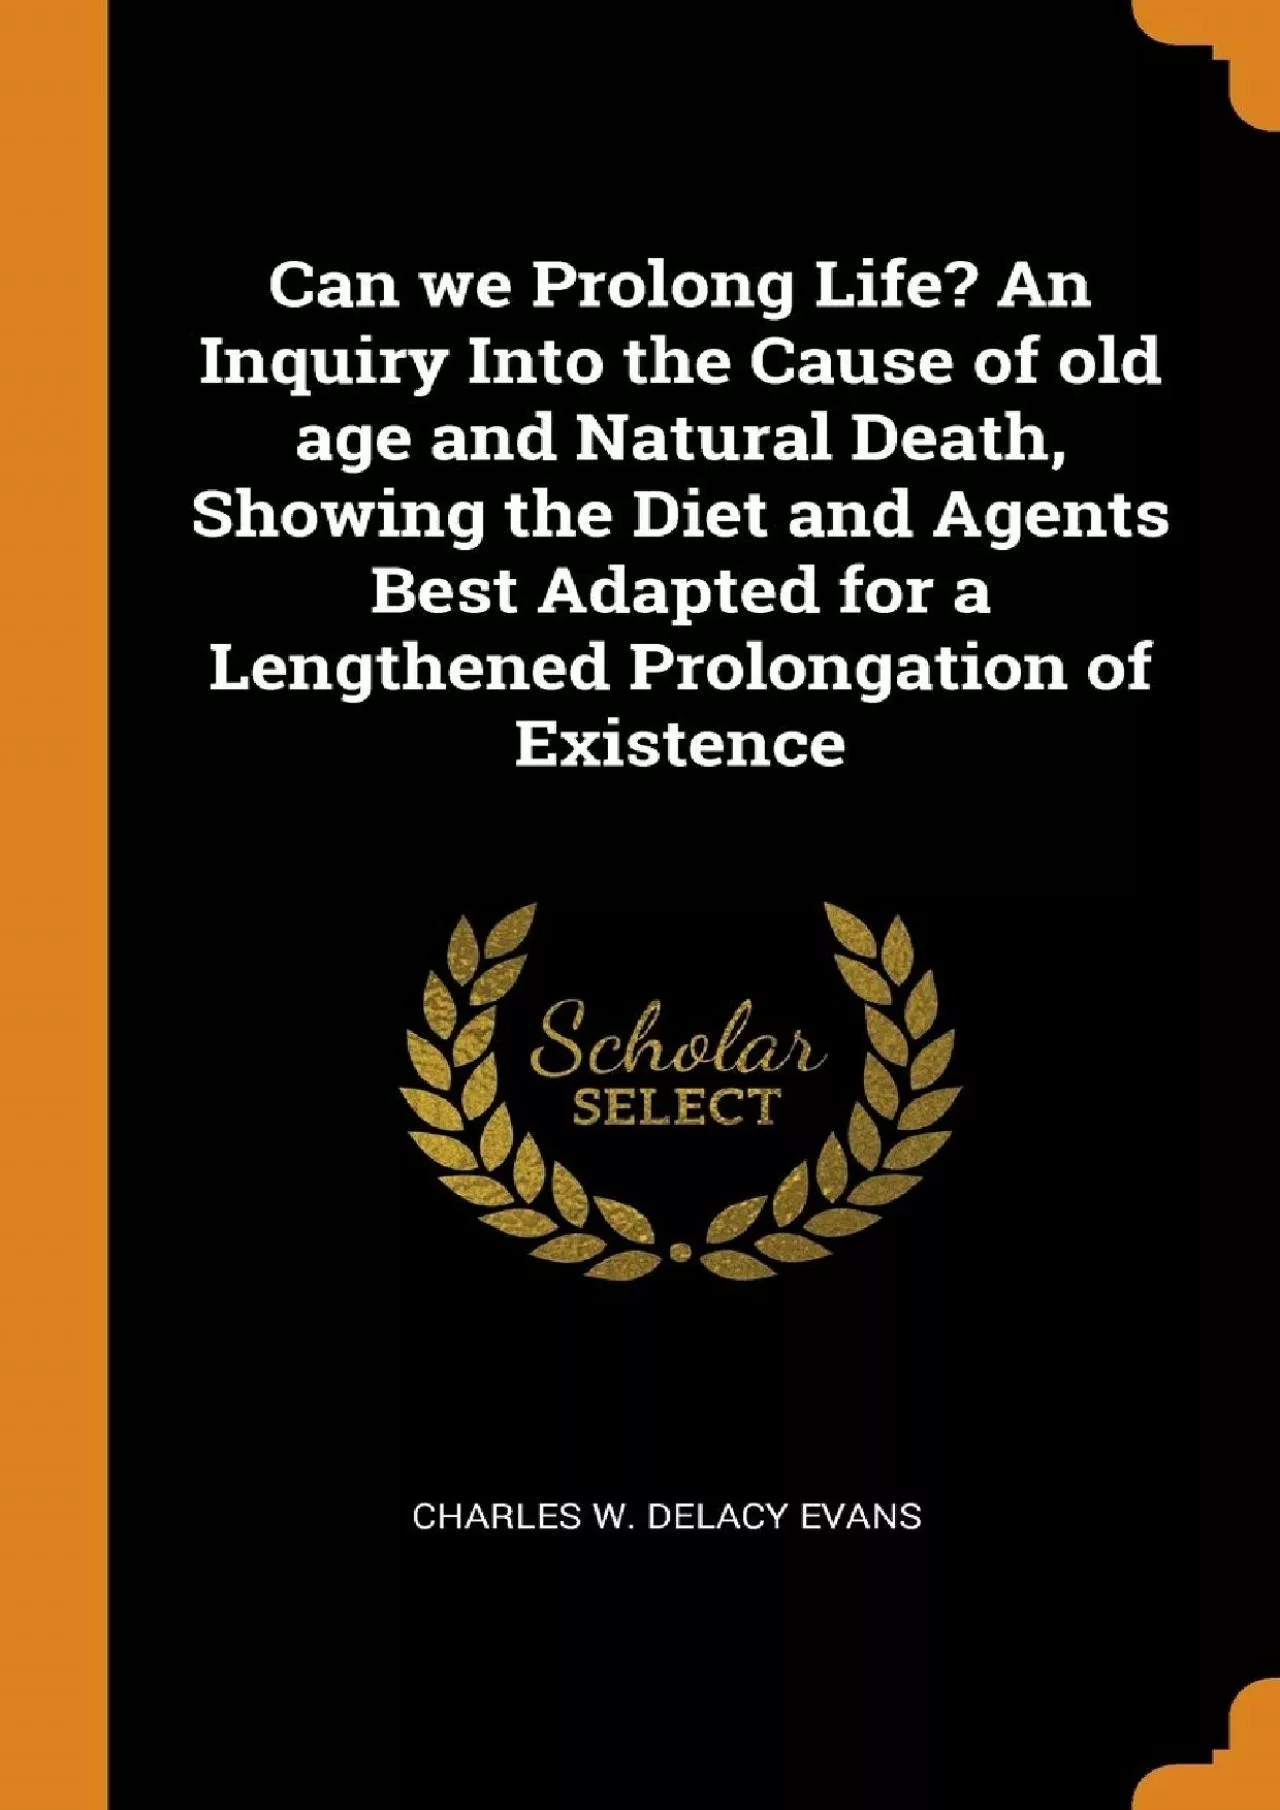 (BOOK)-Can we Prolong Life? An Inquiry Into the Cause of old age and Natural Death, Showing